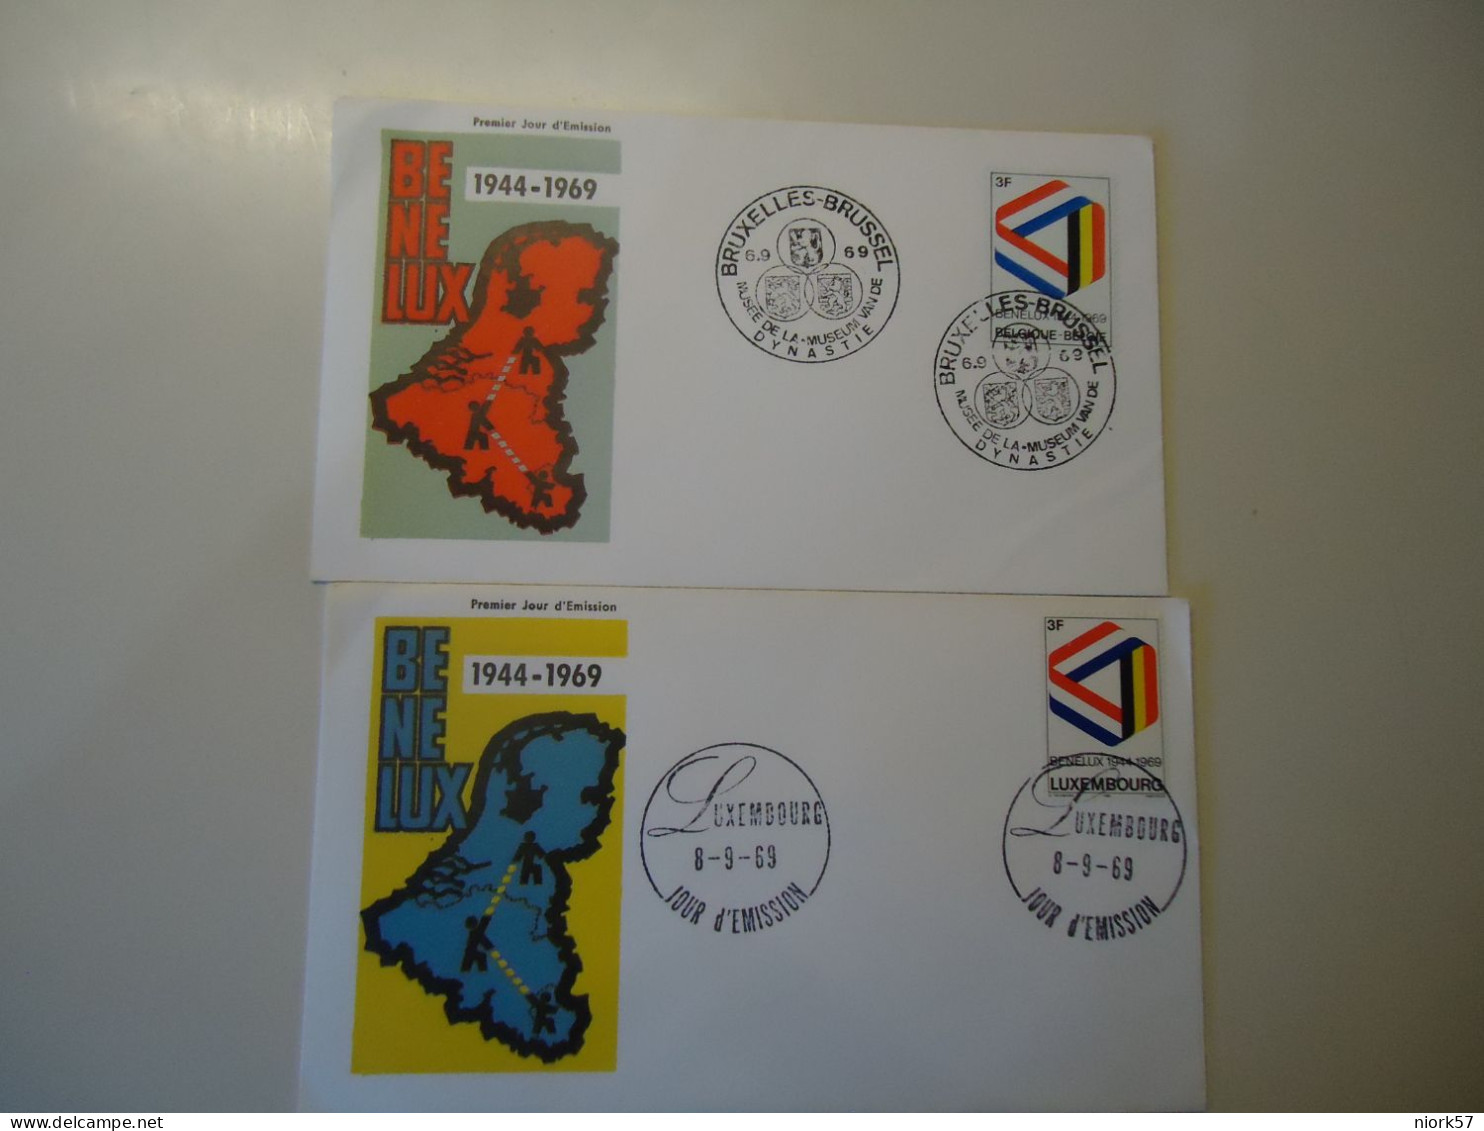 LUXEMBOURG  AND BELGIUM 2  FDC COVER 1969  BENELUX - 1967